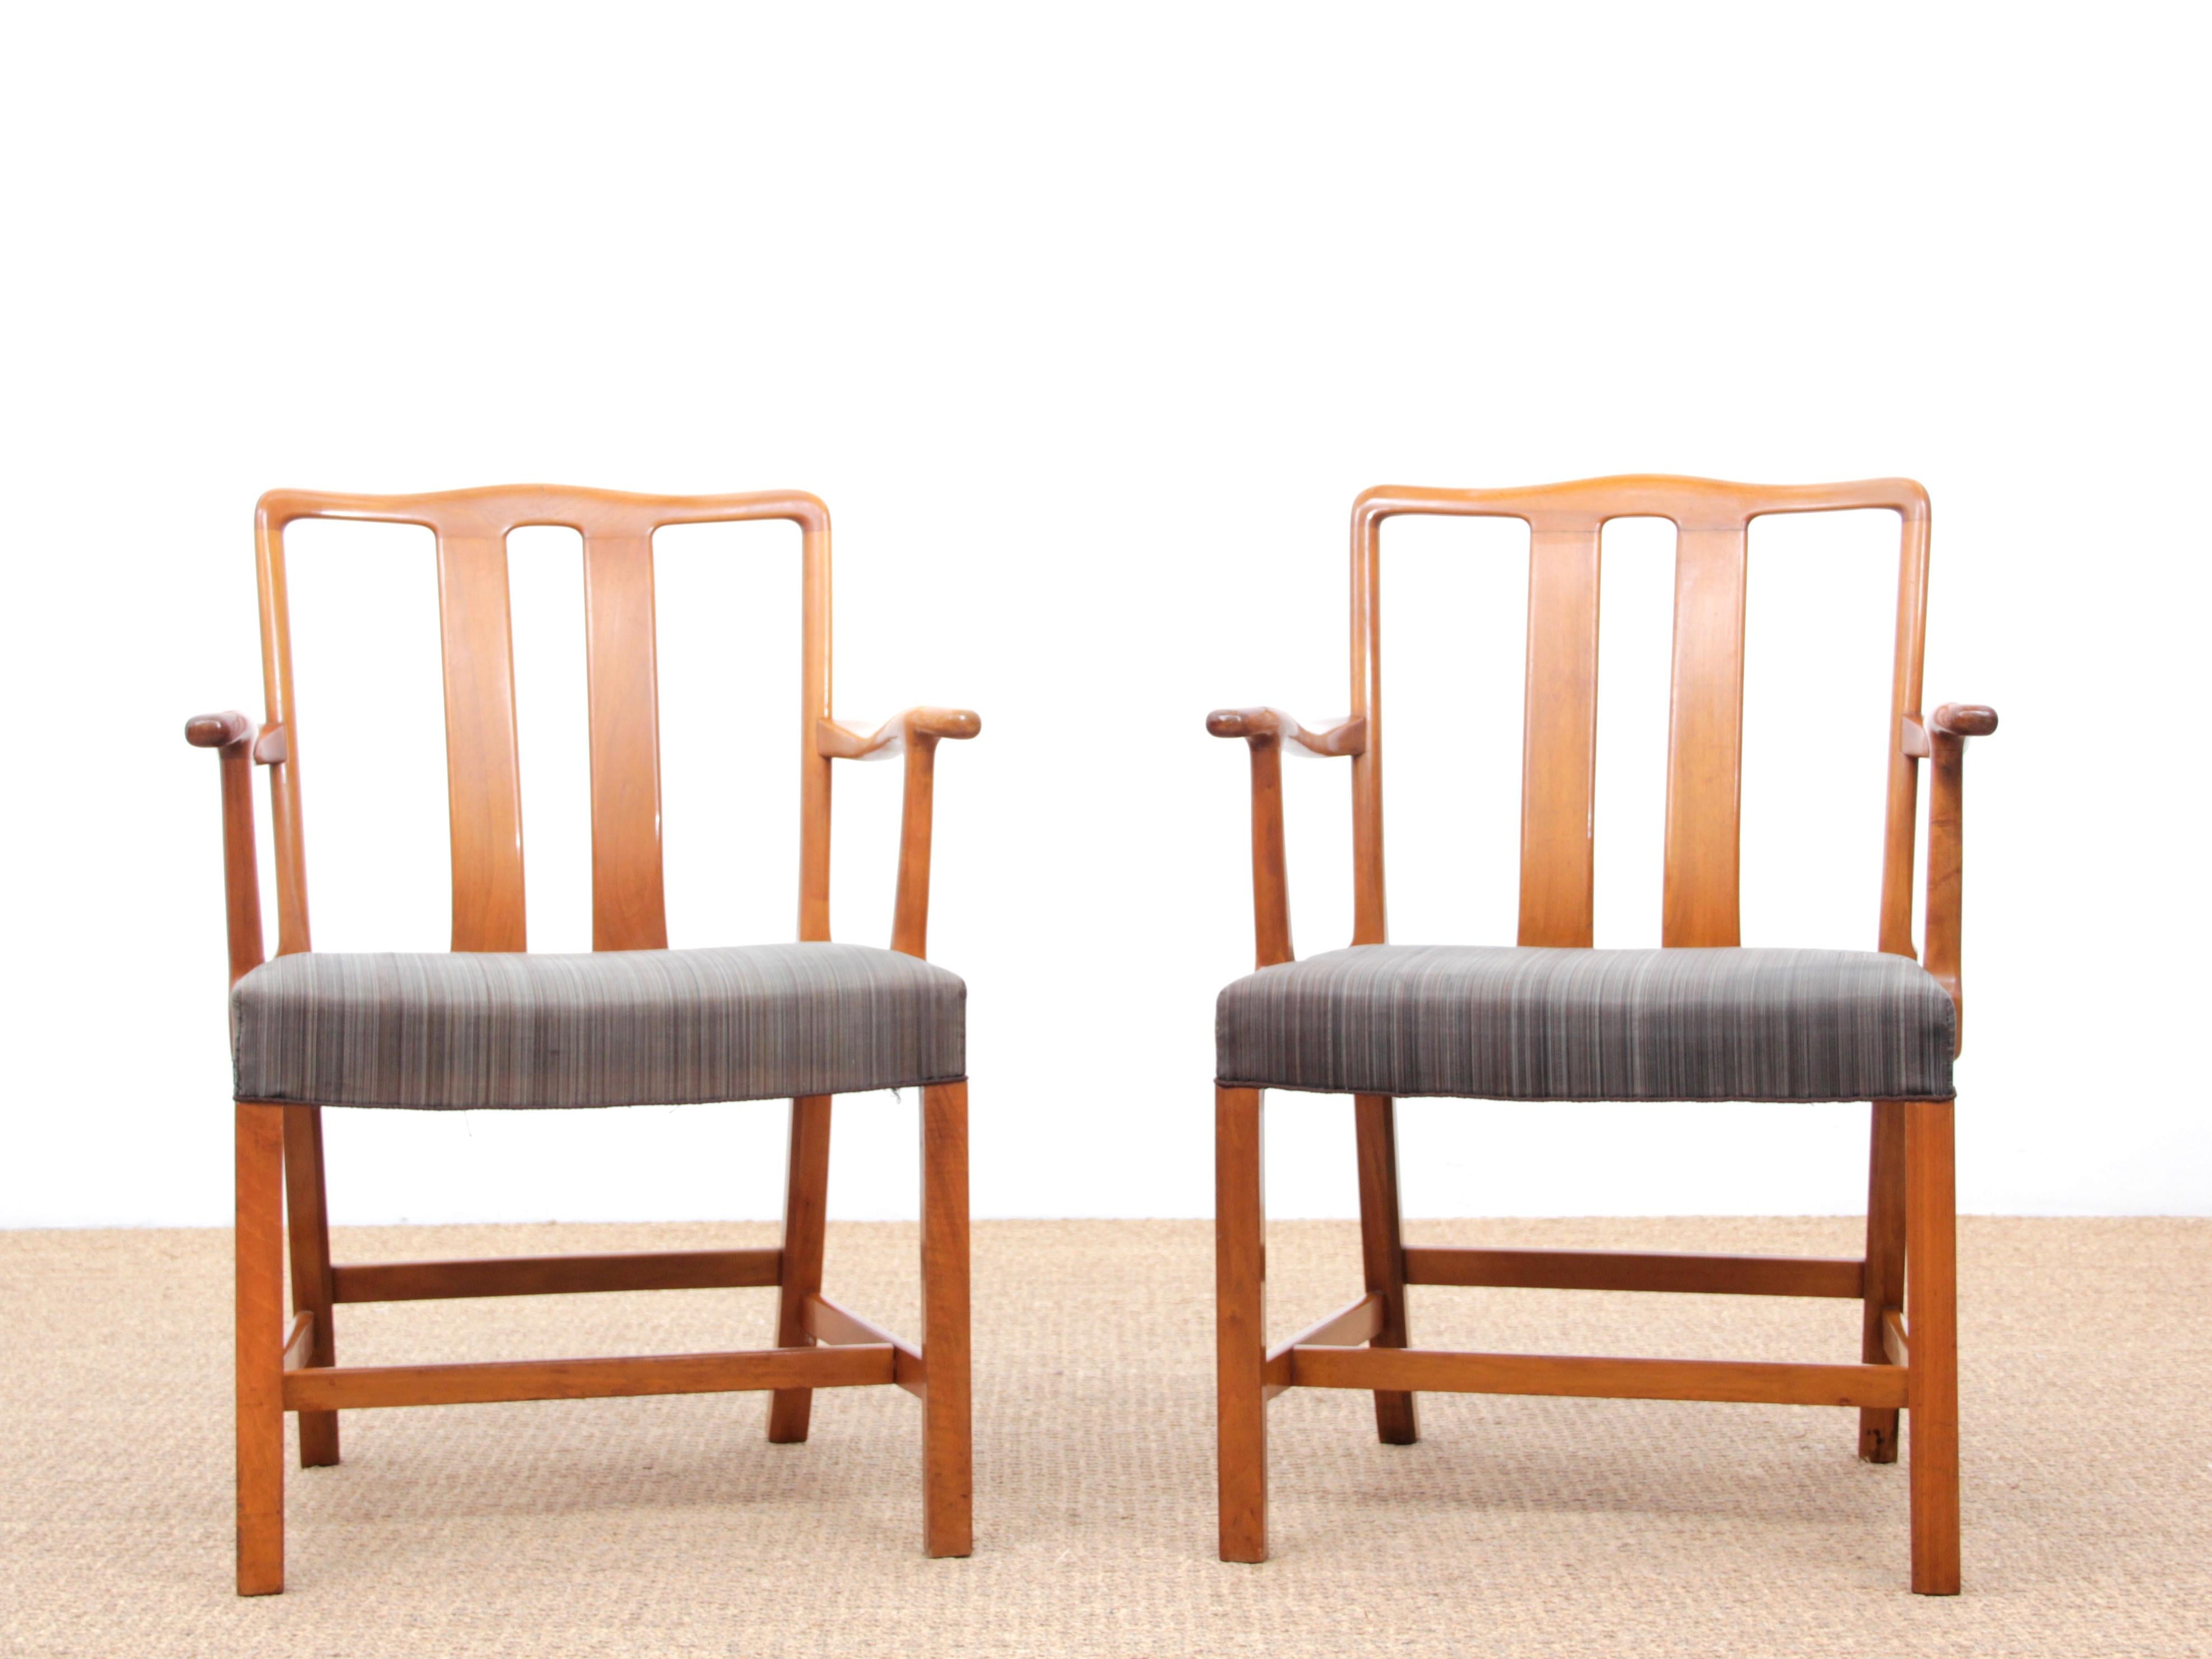 Mid-Century Modern Scandinavian pair of armchairs by Ole Wancher

Mid-Century Modern scandinavian pair of armchairs by Ole Wancher for Fritz Hansen in 1943. Original edition with original uphaolstery in horsehair.
Referenced by the Design Museum